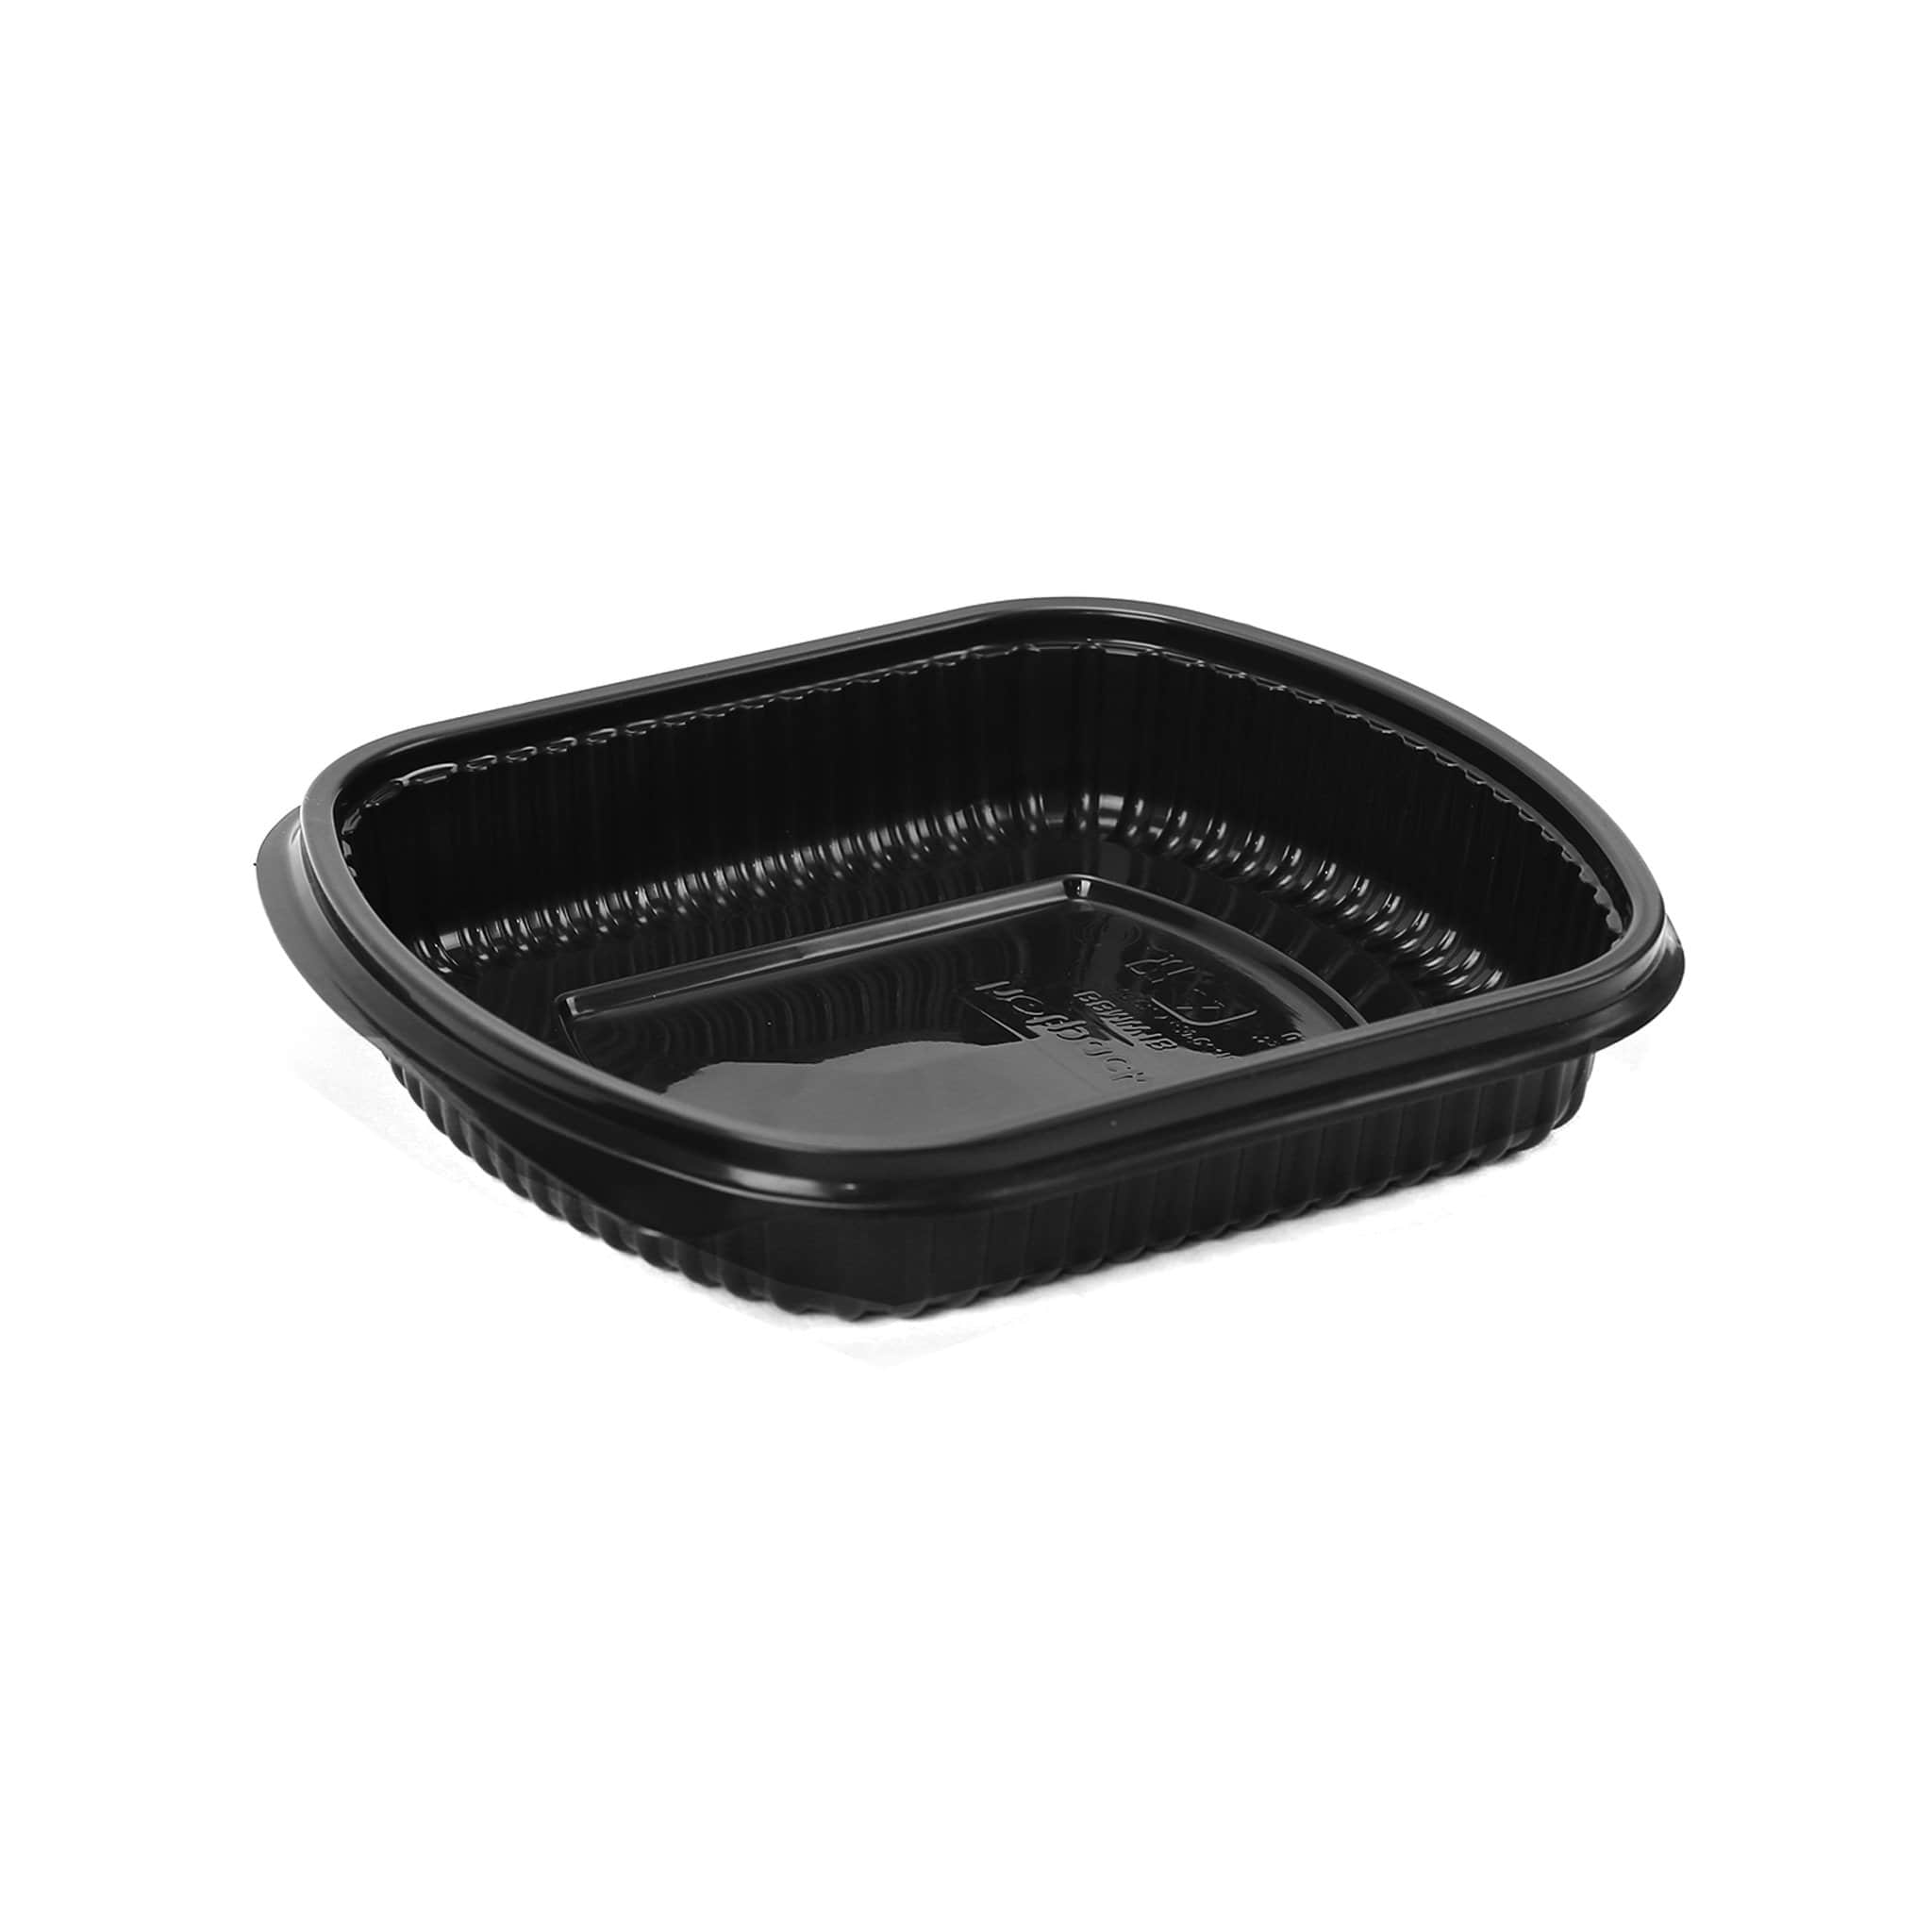 250 Pieces Black Base Rectangular Container with Lid - LBH - 24 x 20.5 x 4.2 cm - Hotpack 